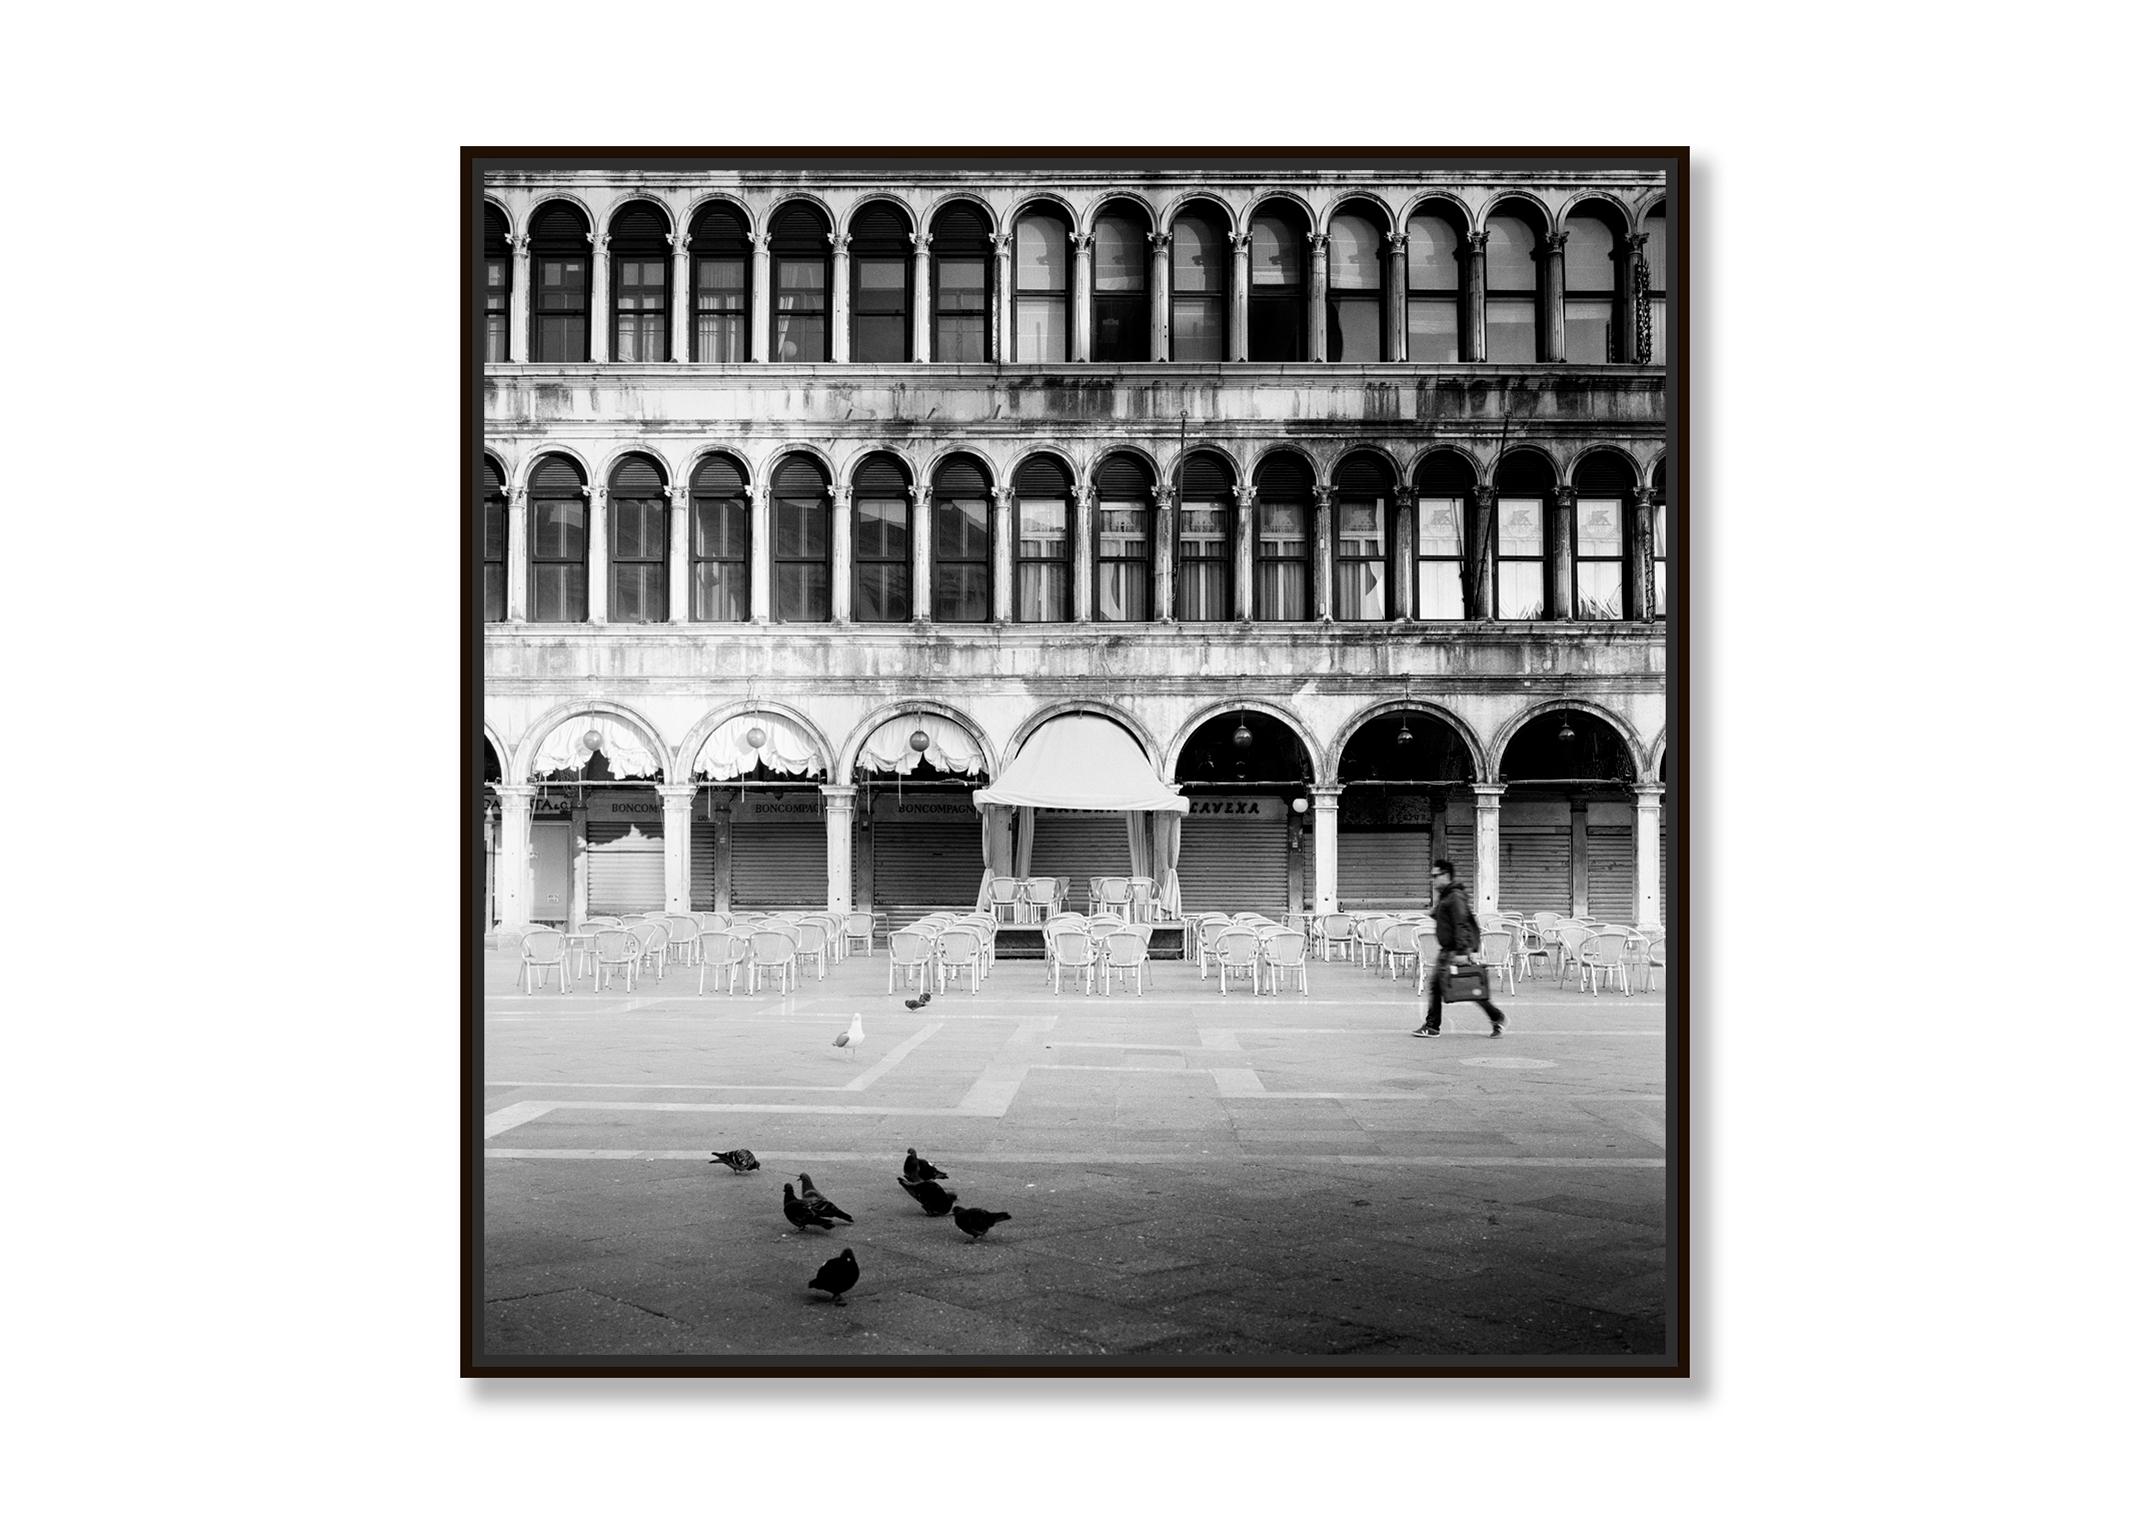 Edition of 9
Produced from the original 6x6cm medium format black and white negative film and printed as archival pigment ink print on fine art paper. 
Hand signed, titled, negative date, print date and numbered on artist label. Selenium toned